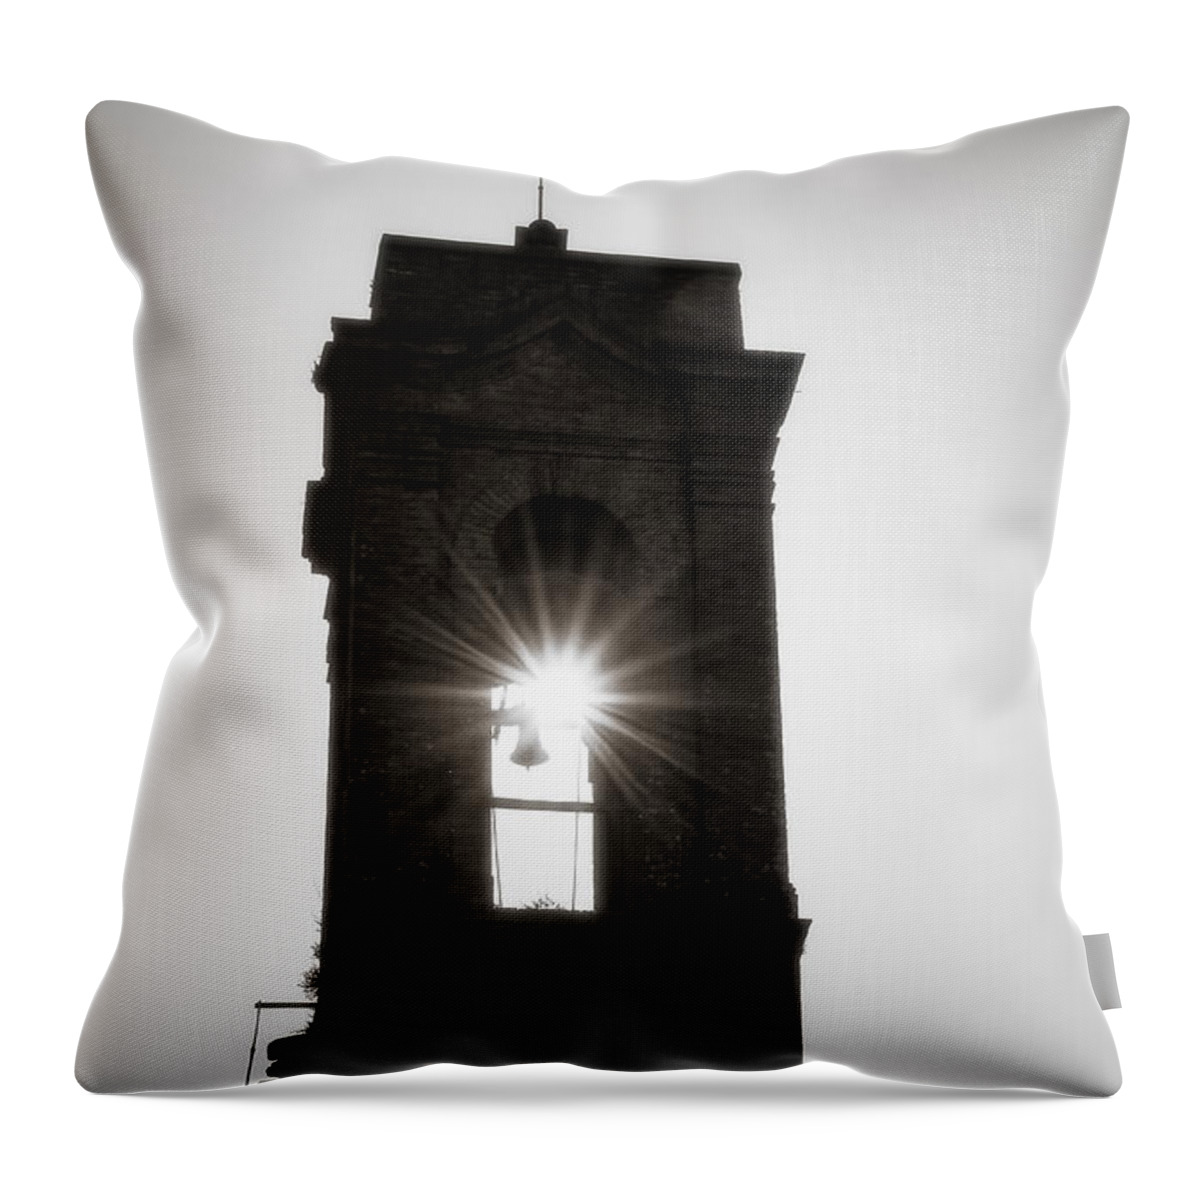 Italy 2015 Throw Pillow featuring the photograph Bell Burst by Deborah Scannell